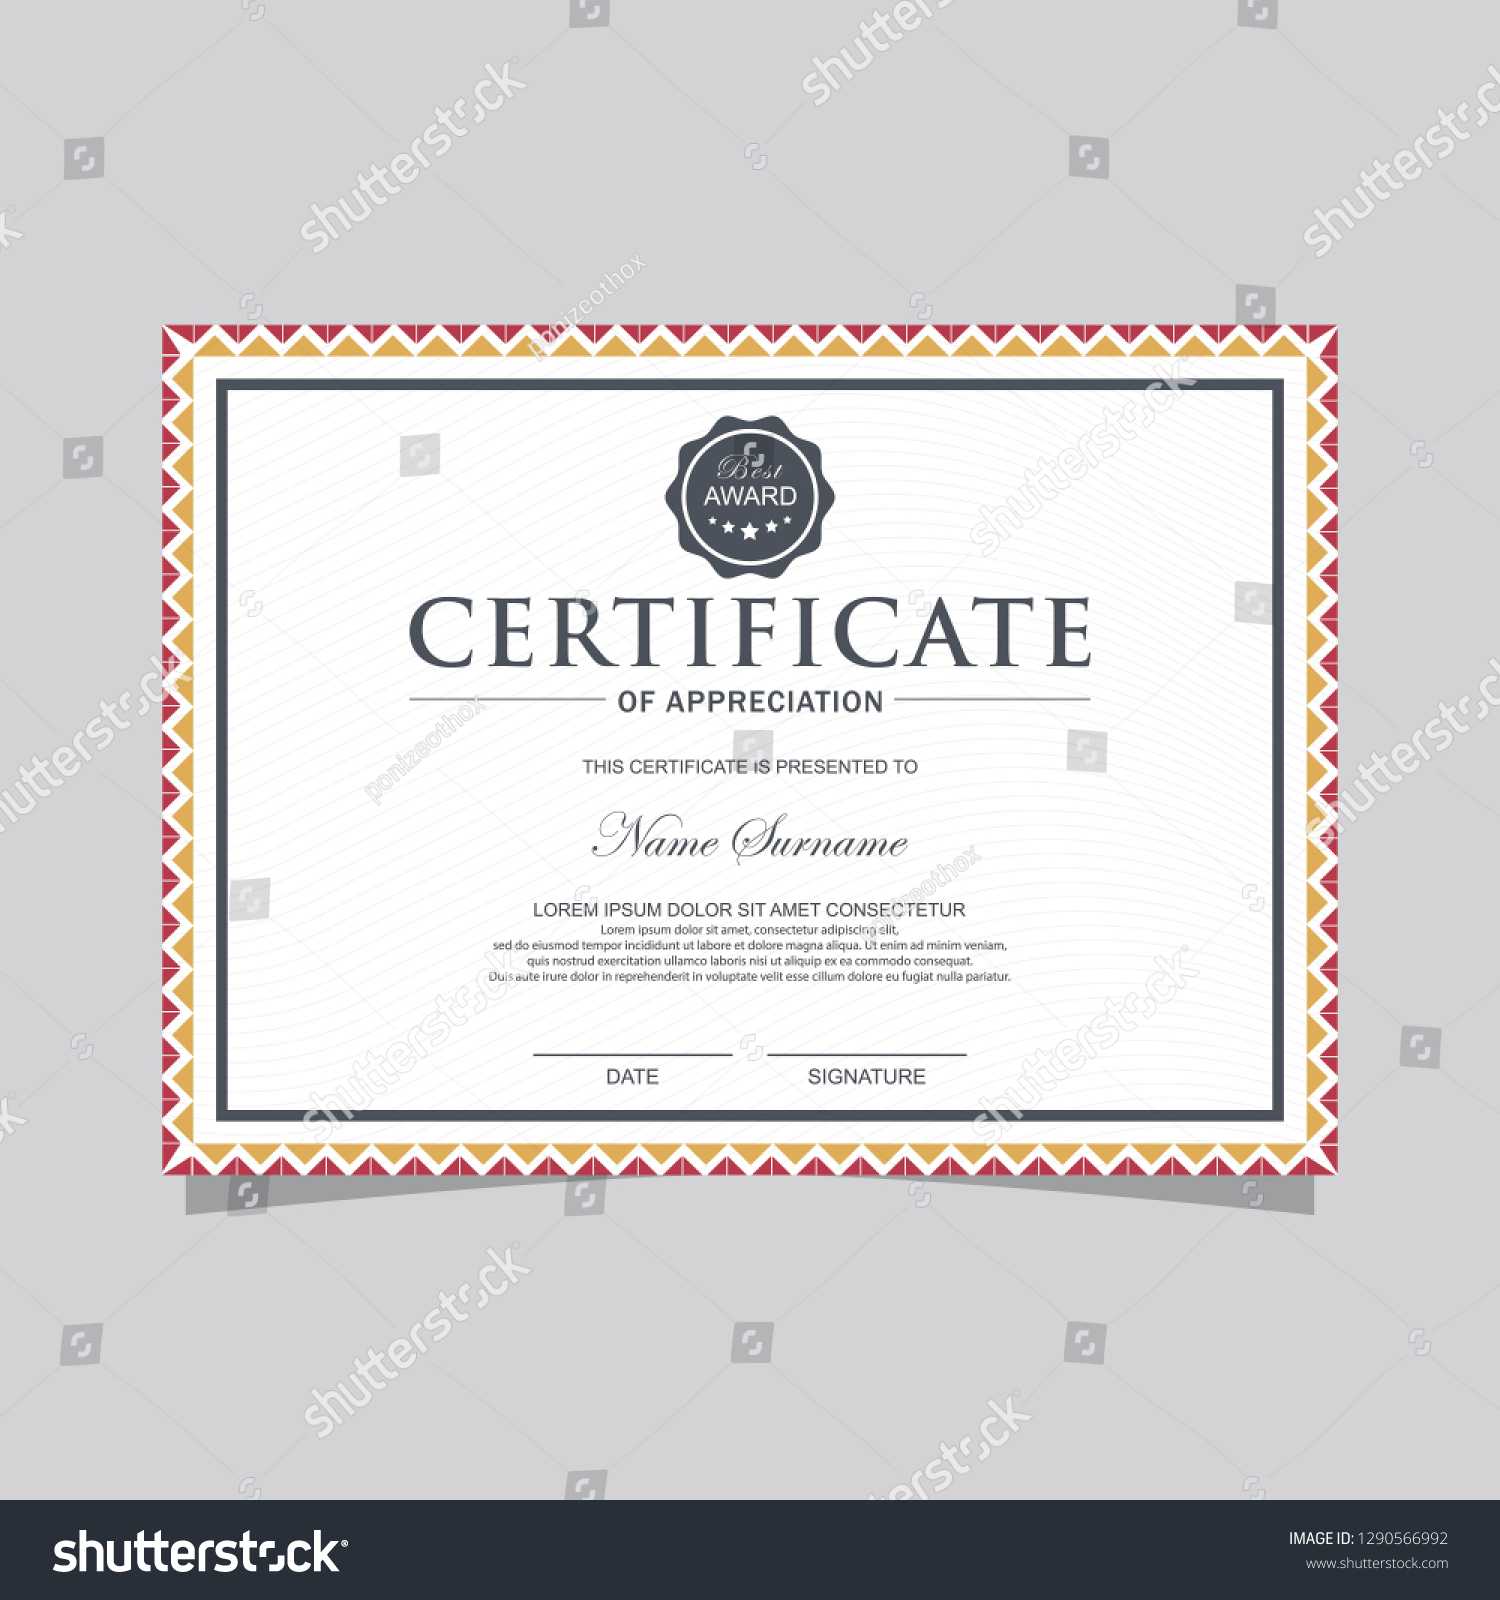 Certificate Template Diploma Currency Border Award | Royalty Within Academic Award Certificate Template